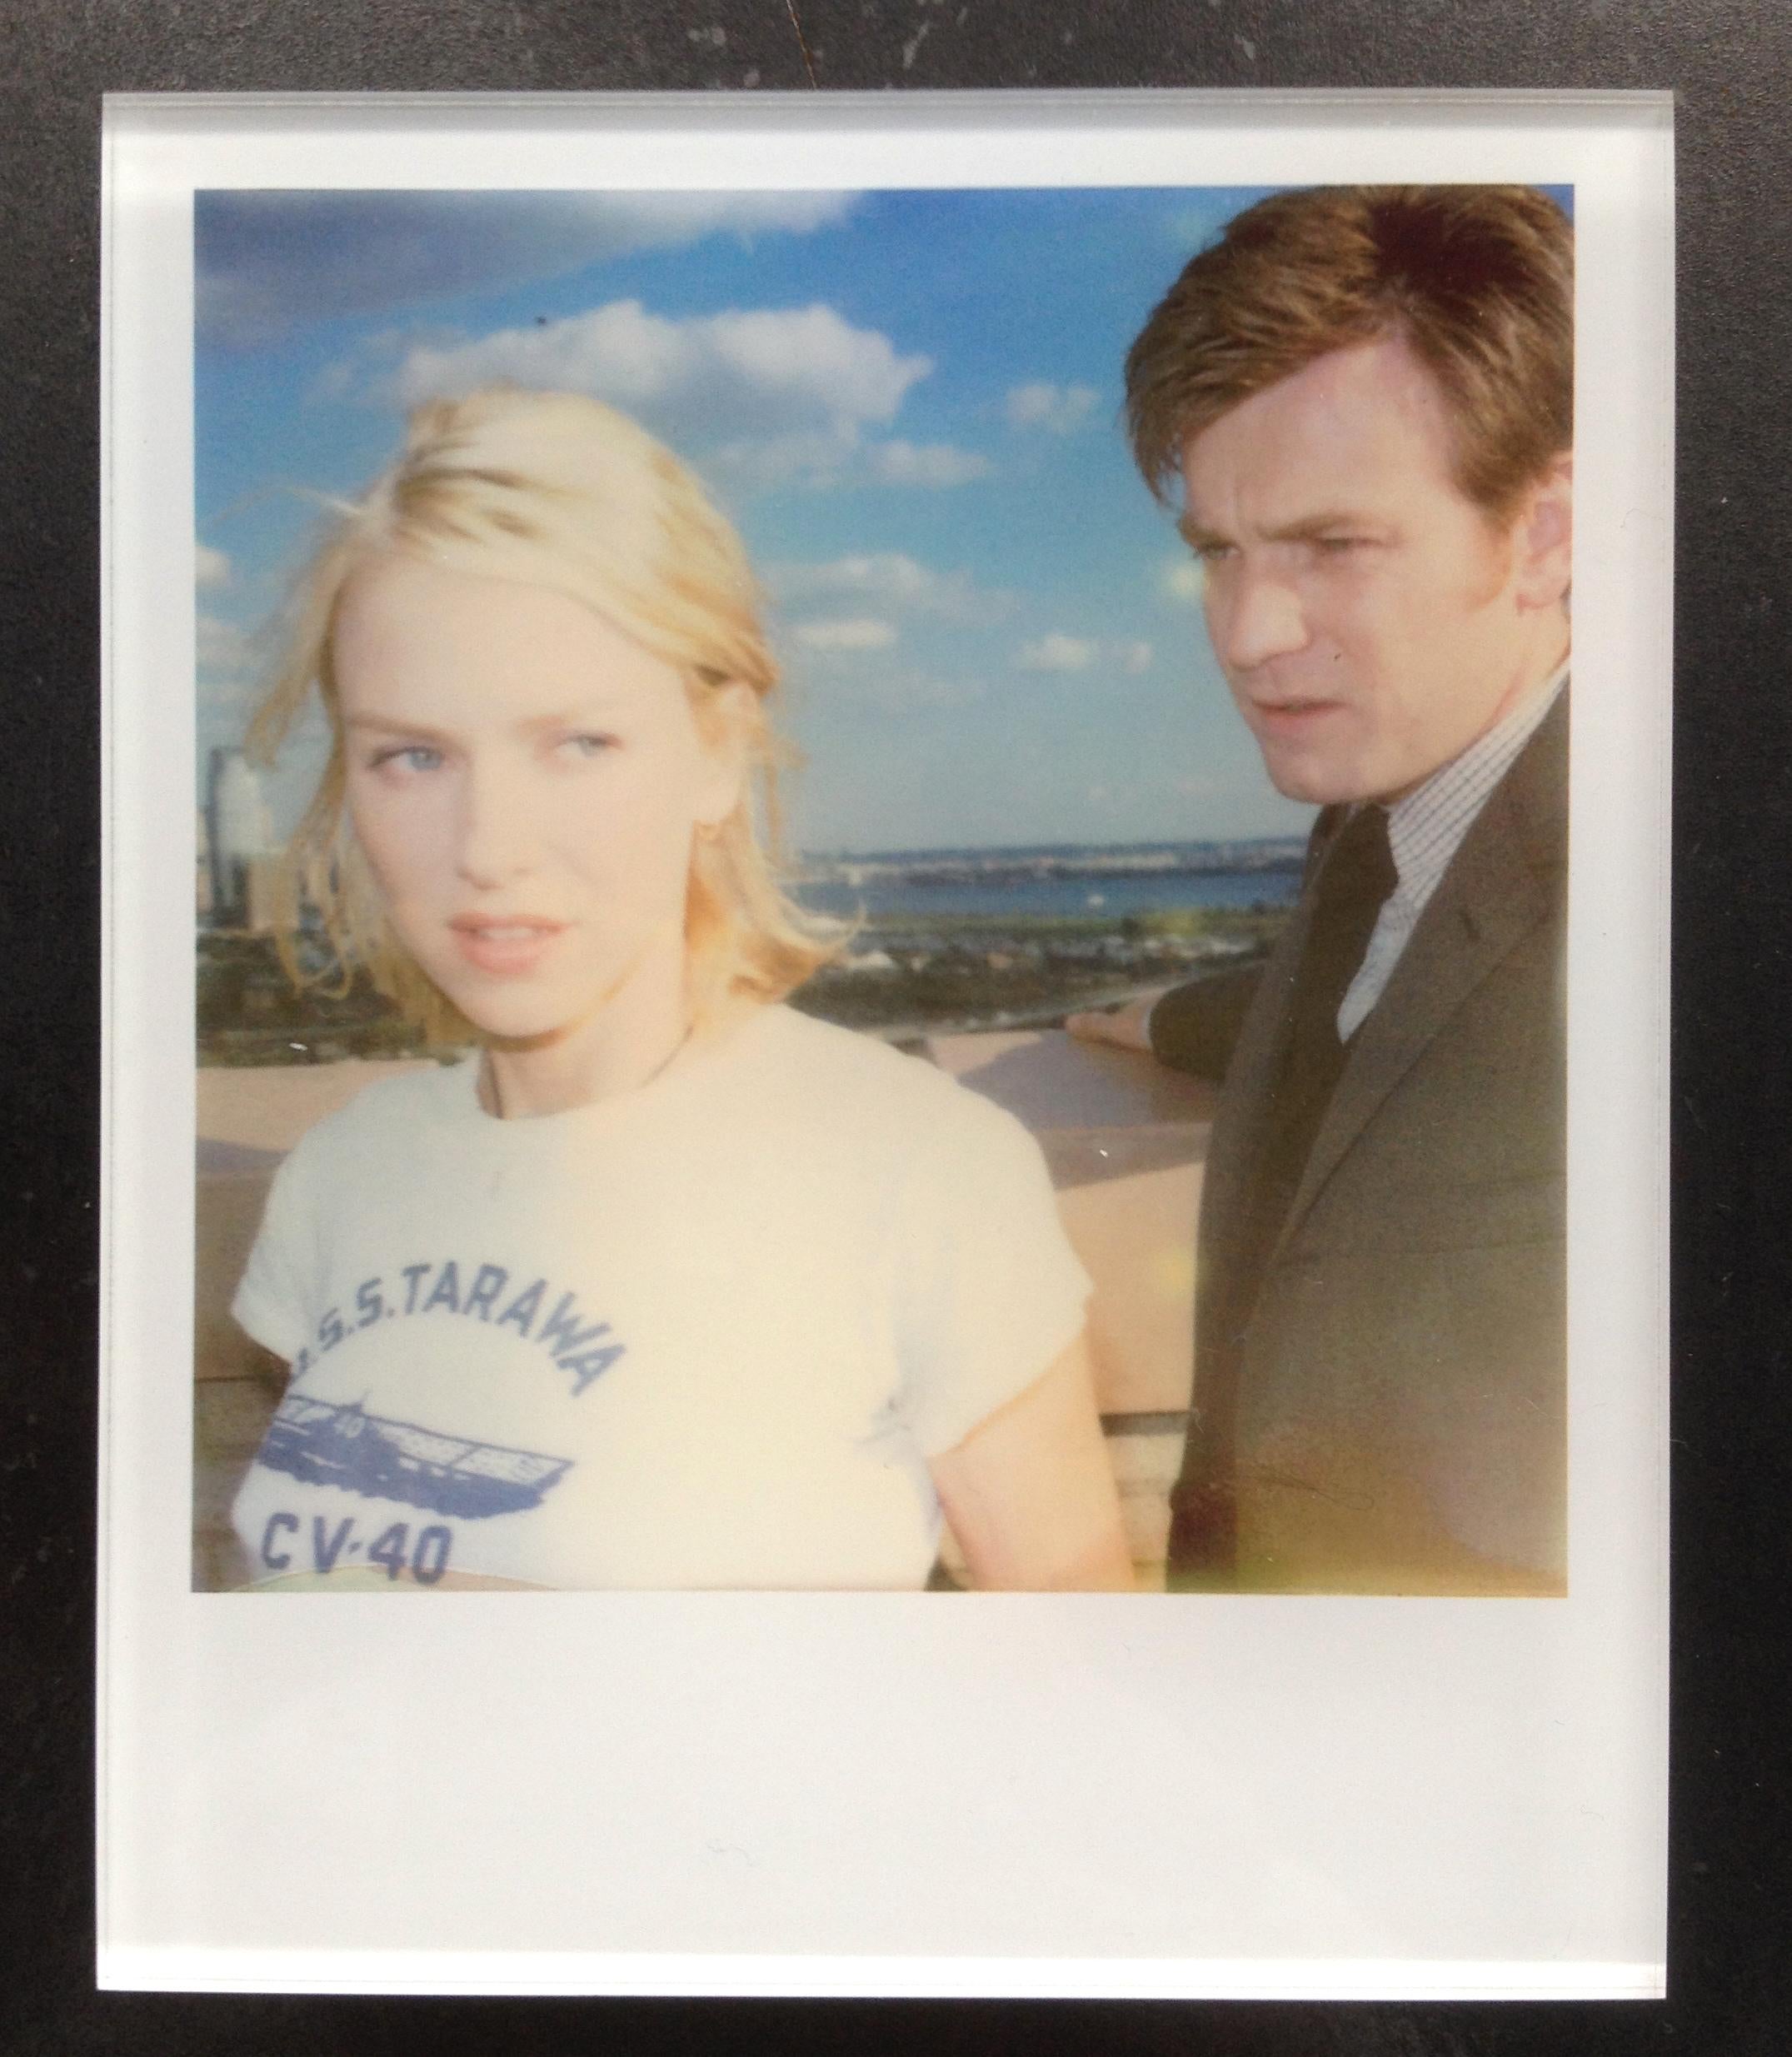 Stefanie Schneider's Minis
'Lila and Sam" (Stay), 2006
signed and signature brand on verso
Lambda digital Color Photographs based on a Polaroid

from the movie 'Stay' featuring Ewan McGregor and Naomi Watts and directed by Marc Forster.

Polaroid